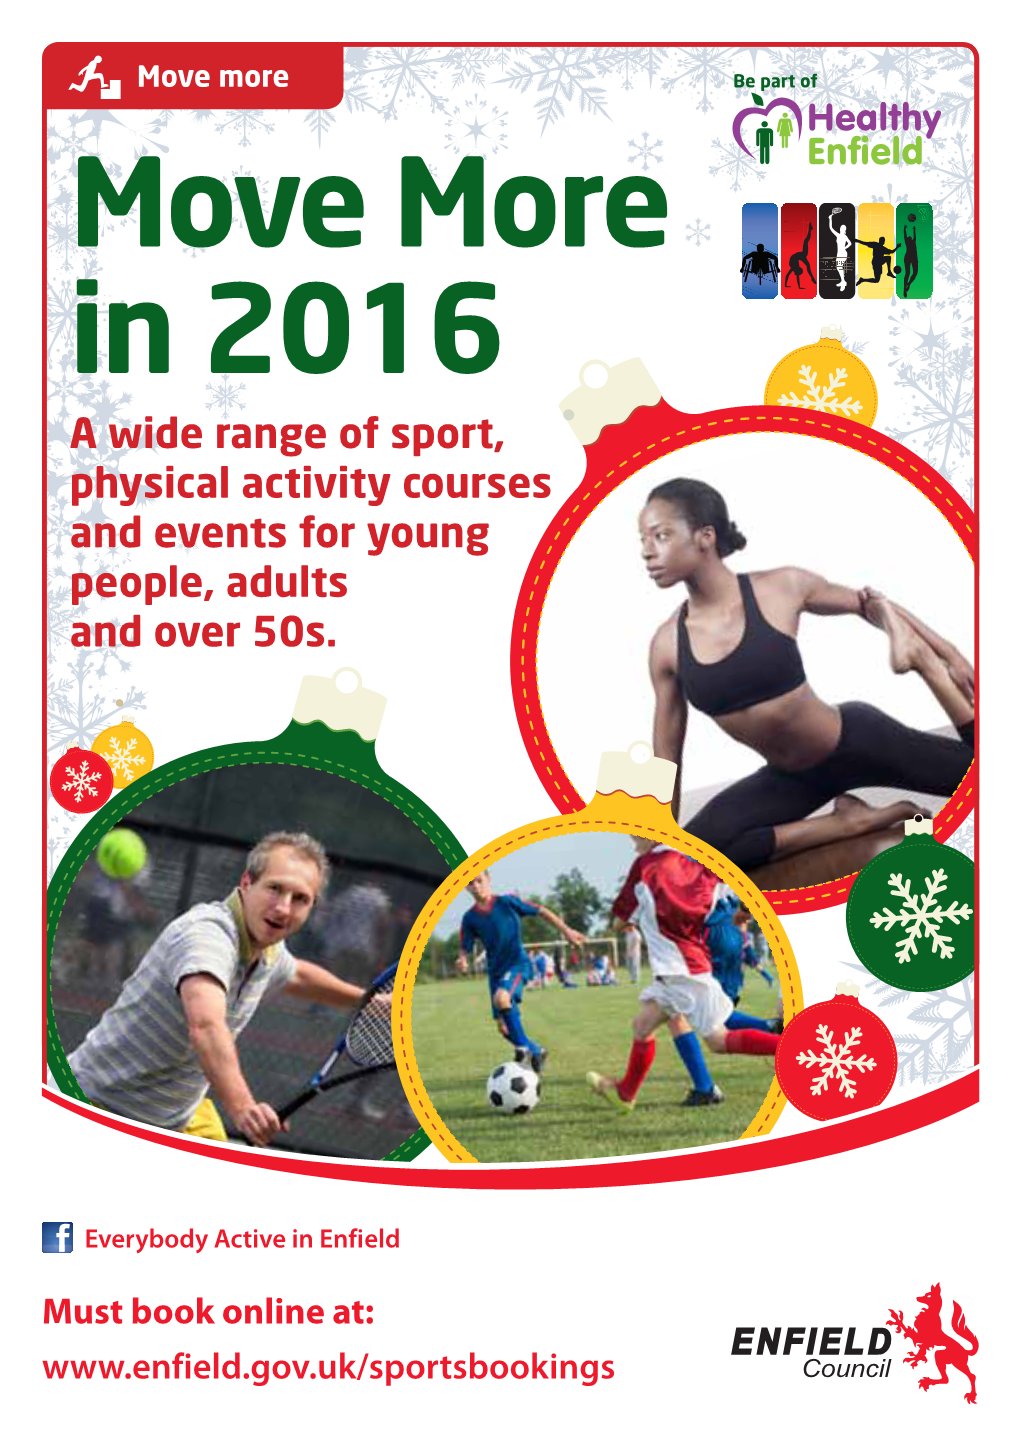 Move More in 2016 a Wide Range of Sport, Physical Activity Courses and Events for Young People, Adults and Over 50S